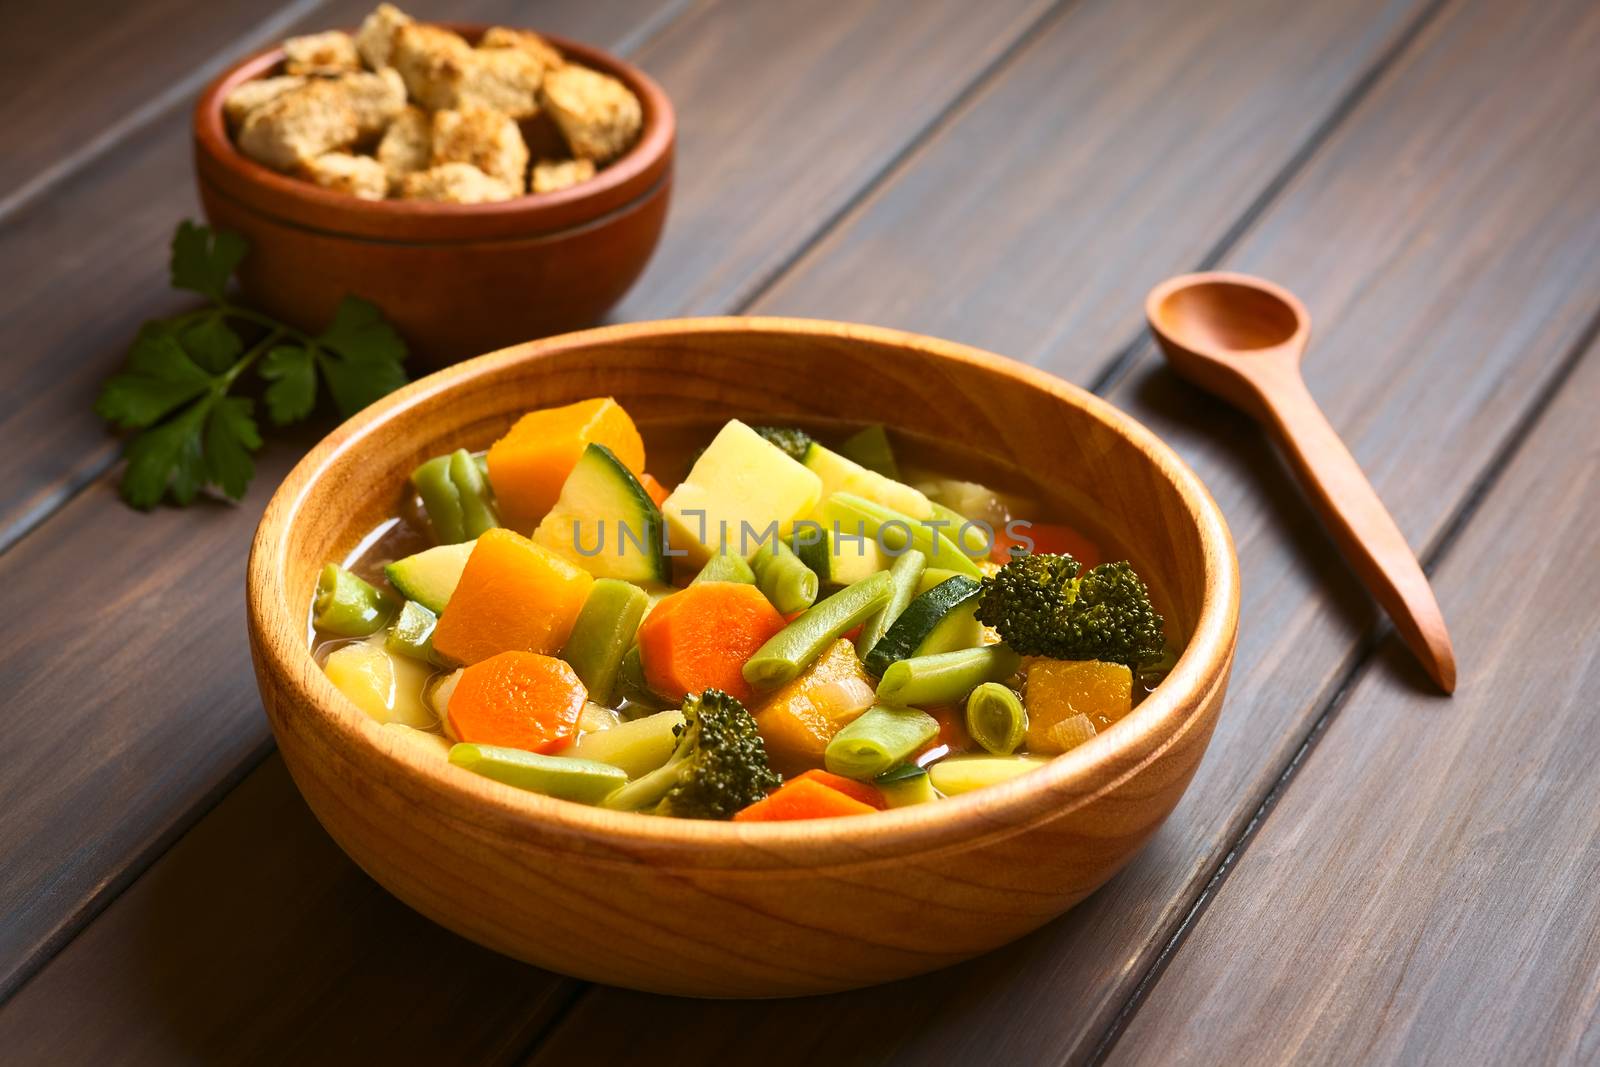 Wooden bowl of vegetable soup made of zucchini, green bean, carrot, broccoli, potato and pumpkin with a small bowl of croutons in the back, photographed with natural light (Selective Focus, Focus one third into the soup)